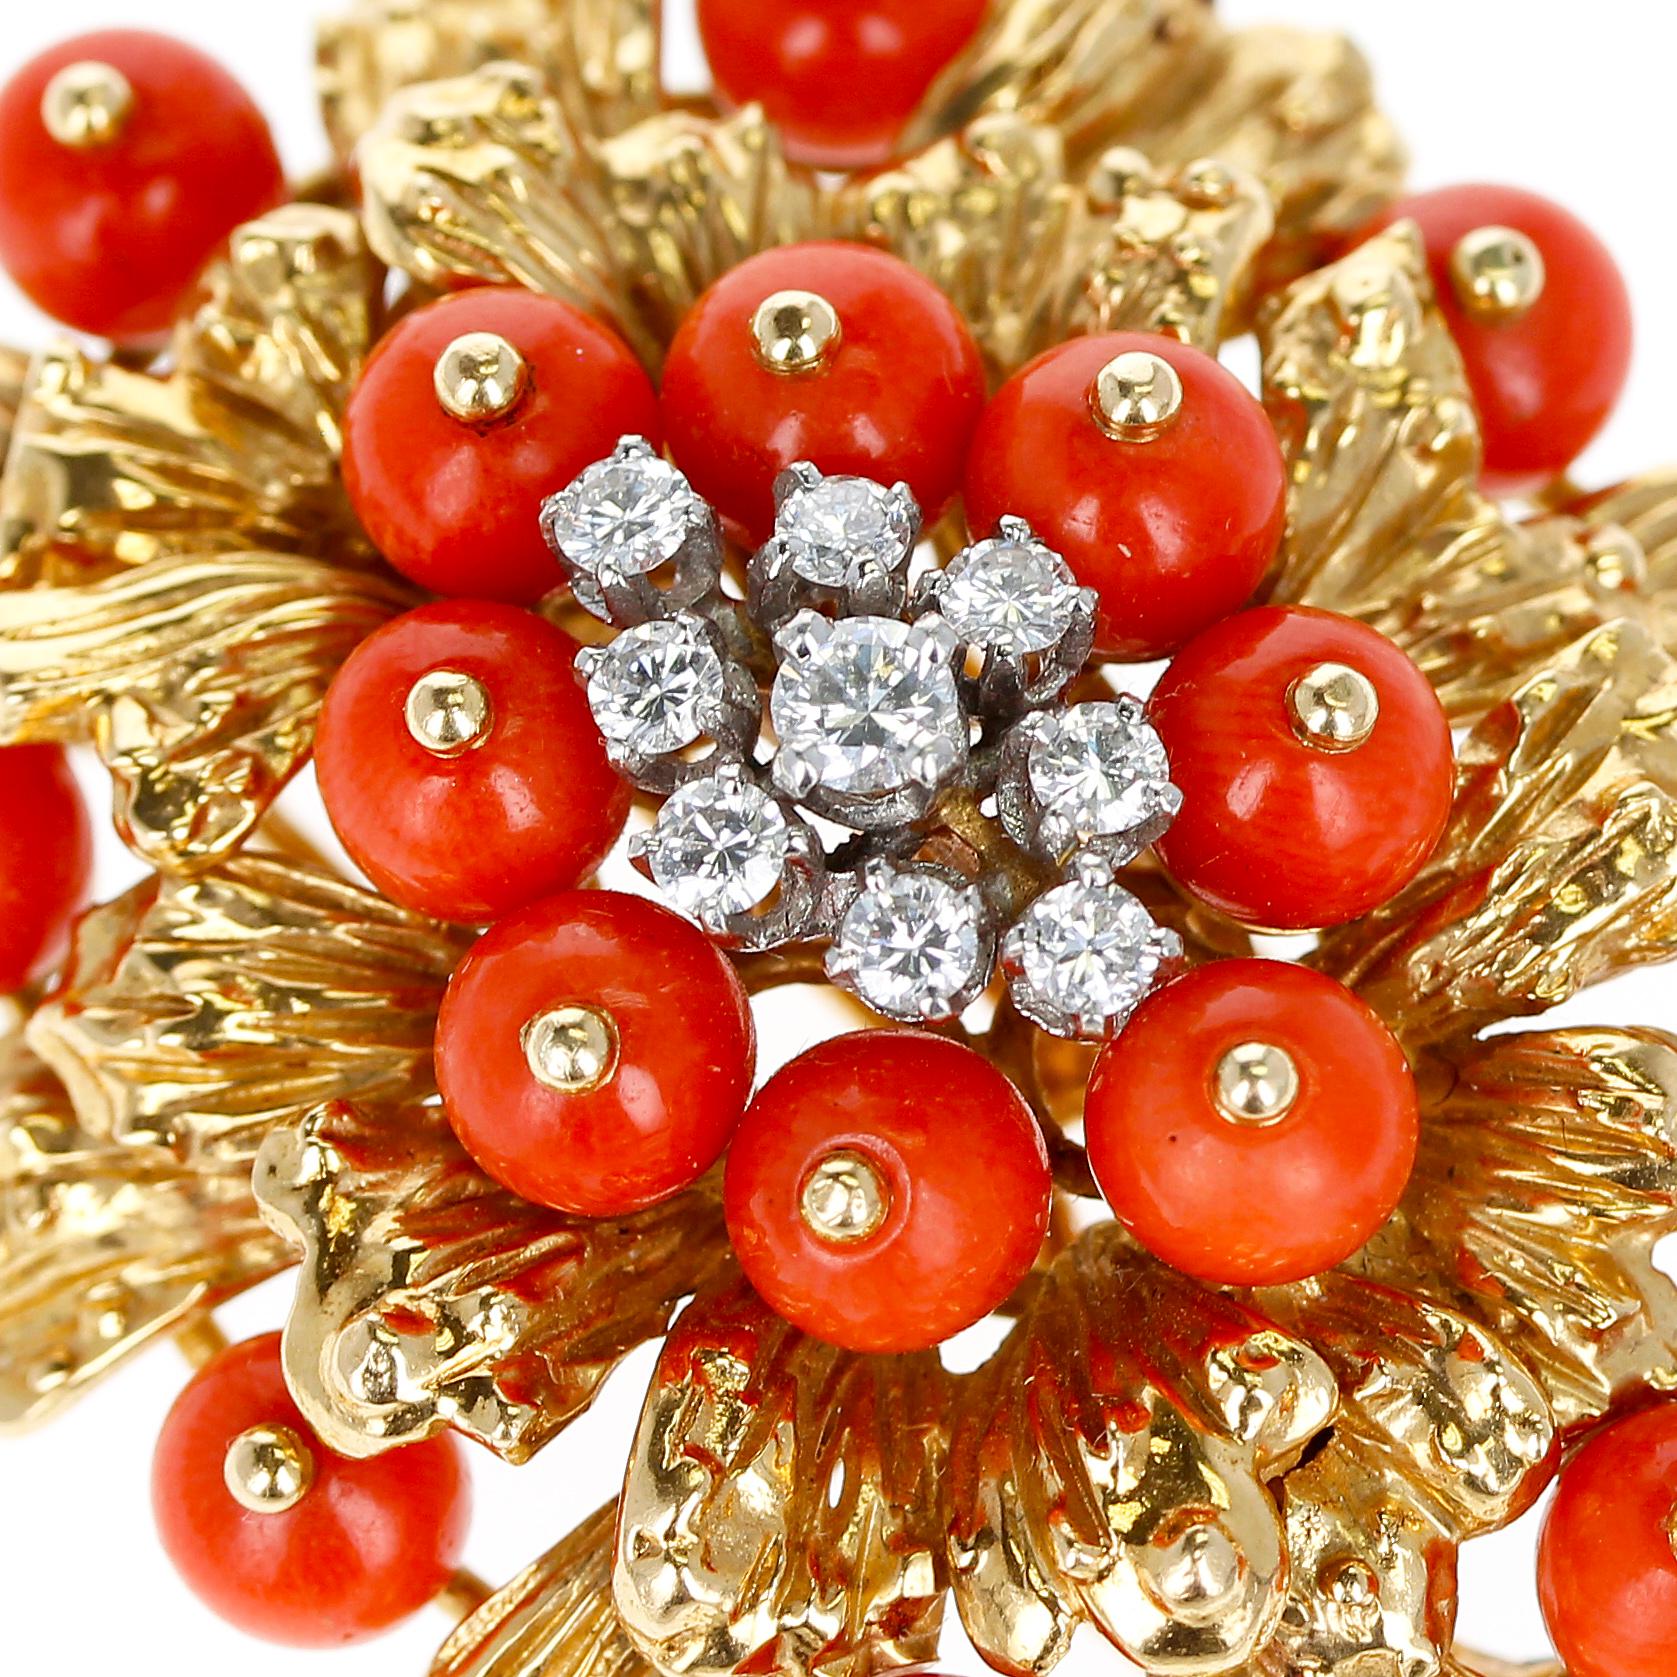 A Cartier Coral, Diamonds, and 18 Karat Gold Brooch. There are 9 diamonds and 19 coral beads. The length is 4.50CM and the width is 4.0CM. The total weight is 34.98 grams. The brooch also converts into a pendant. It is truly a work of art and a